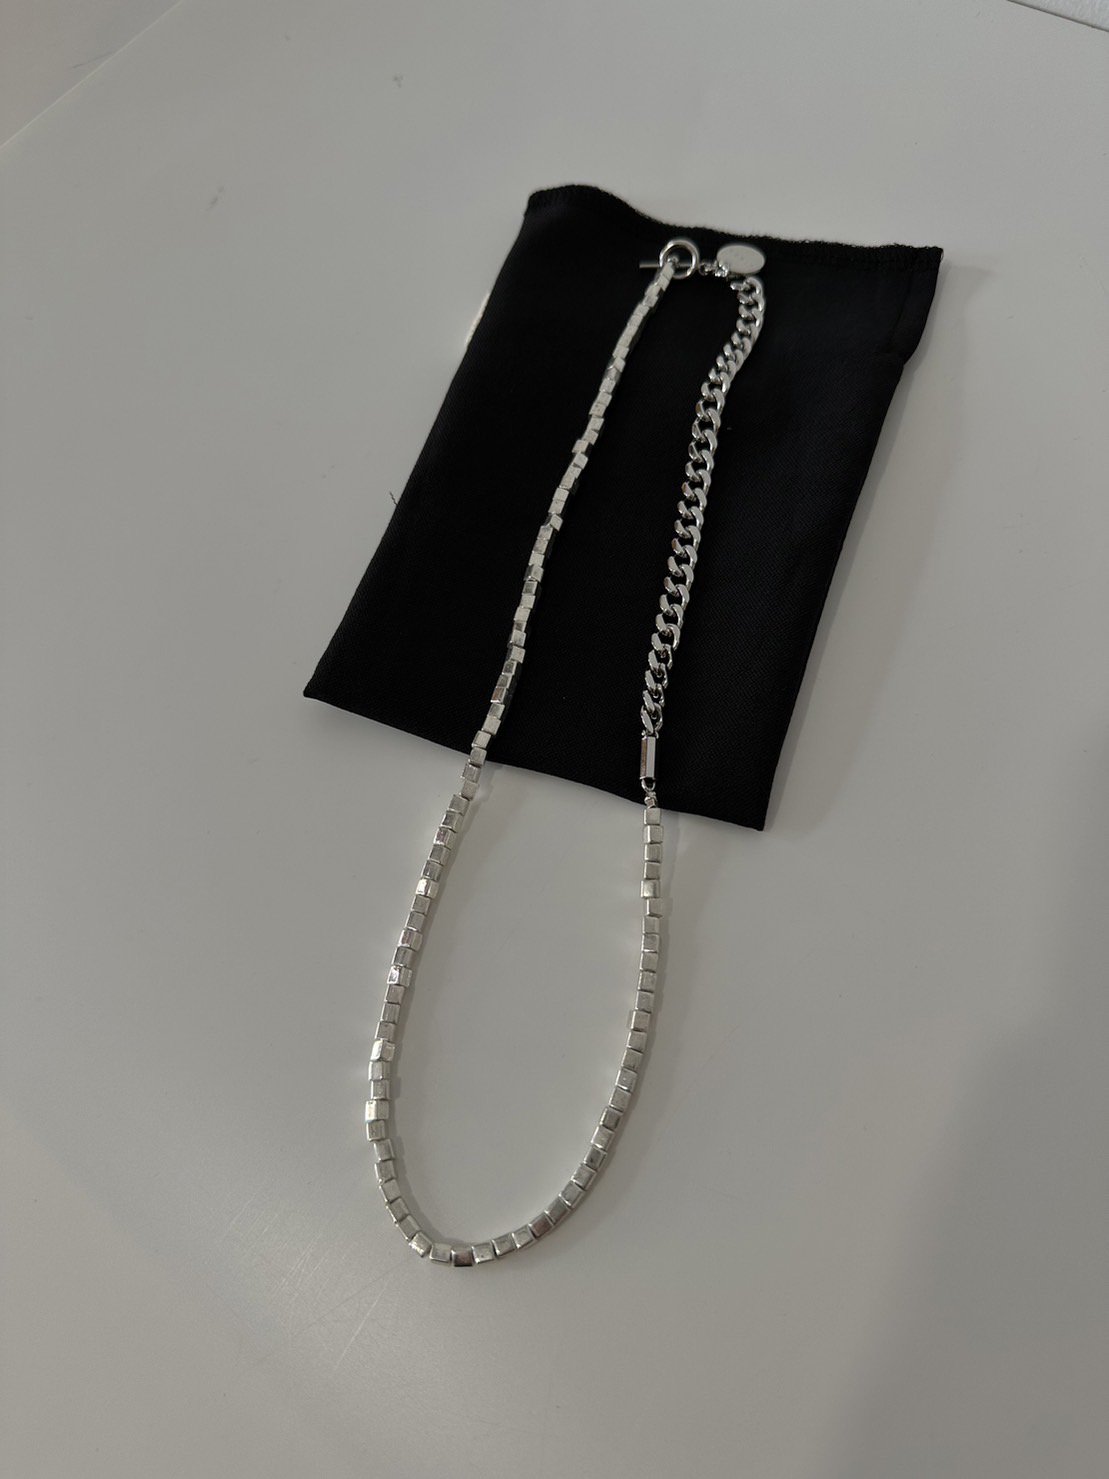 JieDa<br />SWITCHING BEADS NECKLACE / SILVER <img class='new_mark_img2' src='https://img.shop-pro.jp/img/new/icons14.gif' style='border:none;display:inline;margin:0px;padding:0px;width:auto;' />